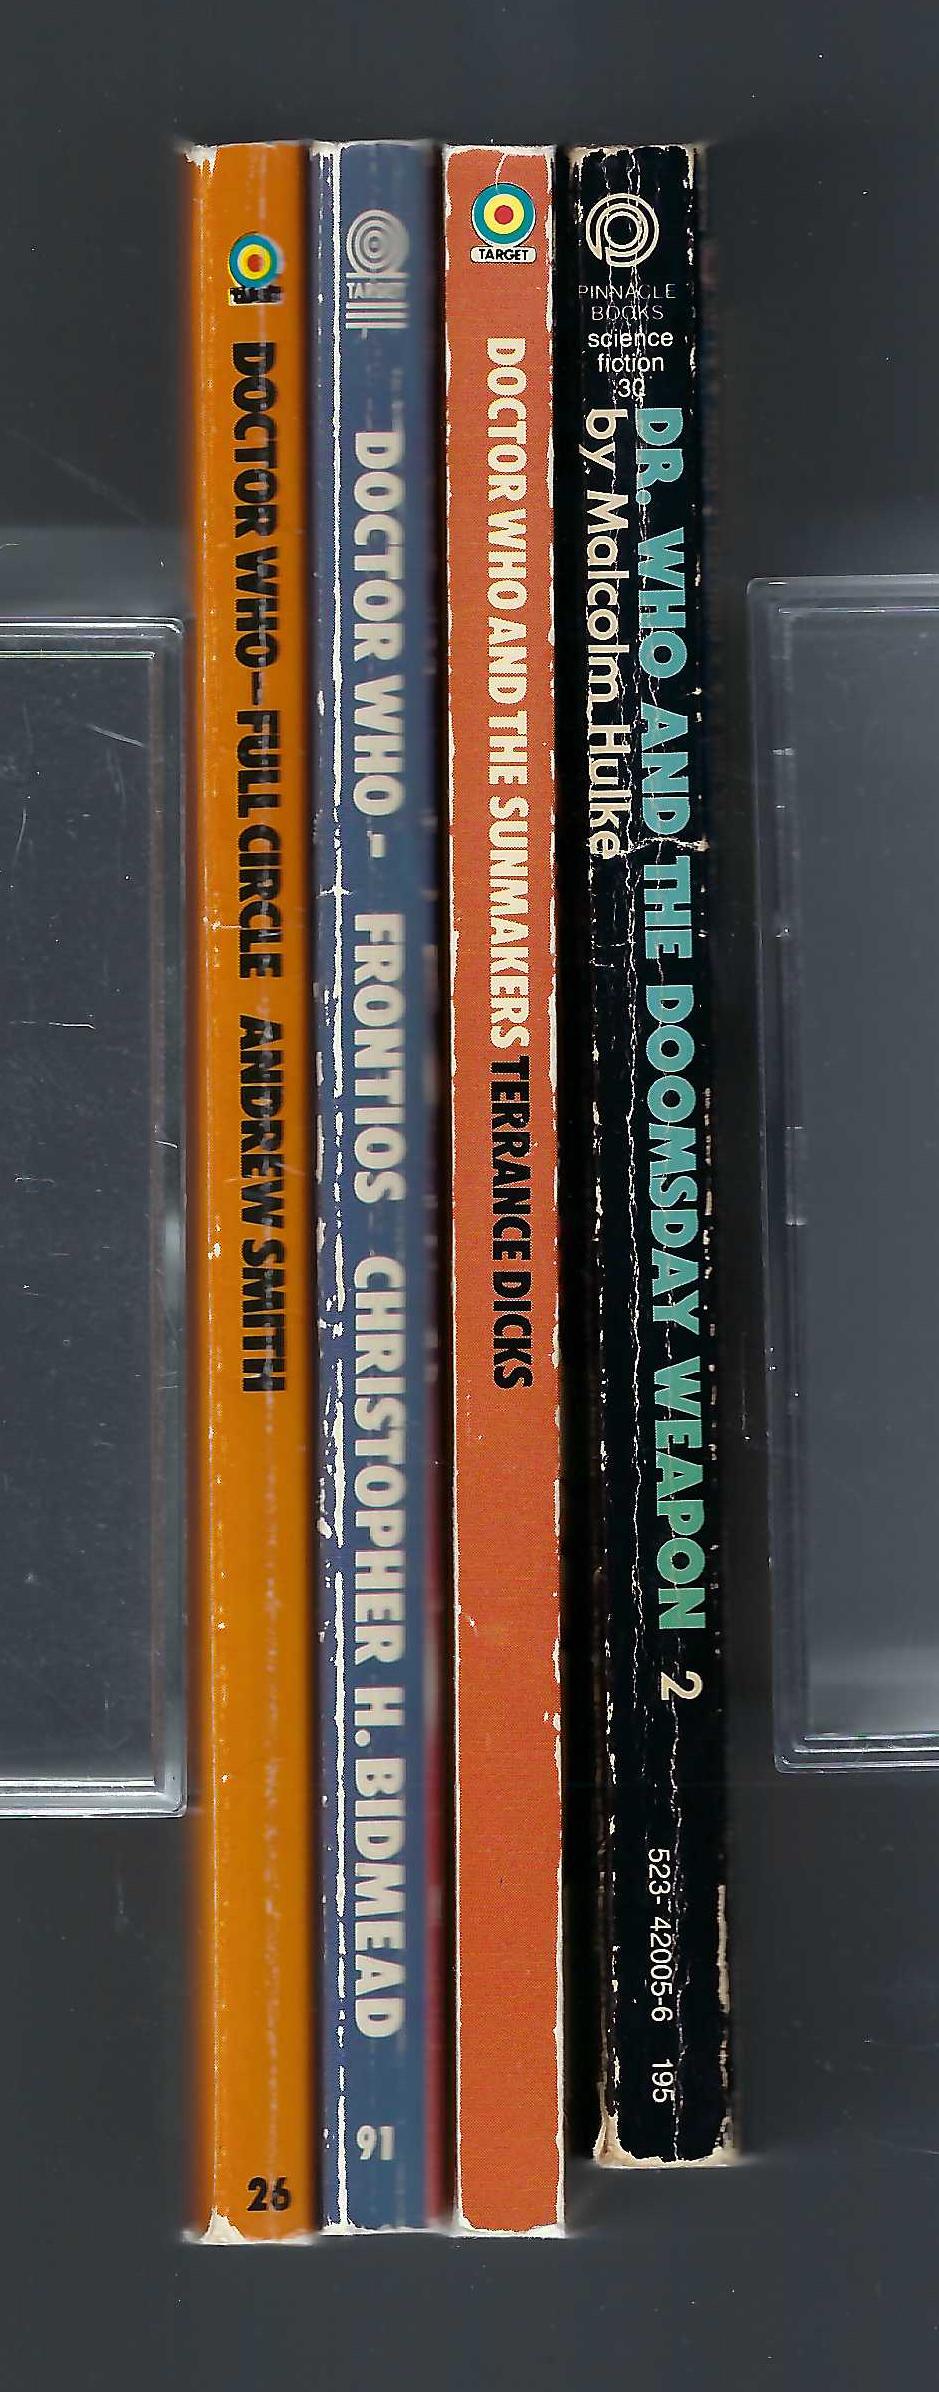 Doctor Who Full Circle by Andrew Smith spine and three other books that are not included